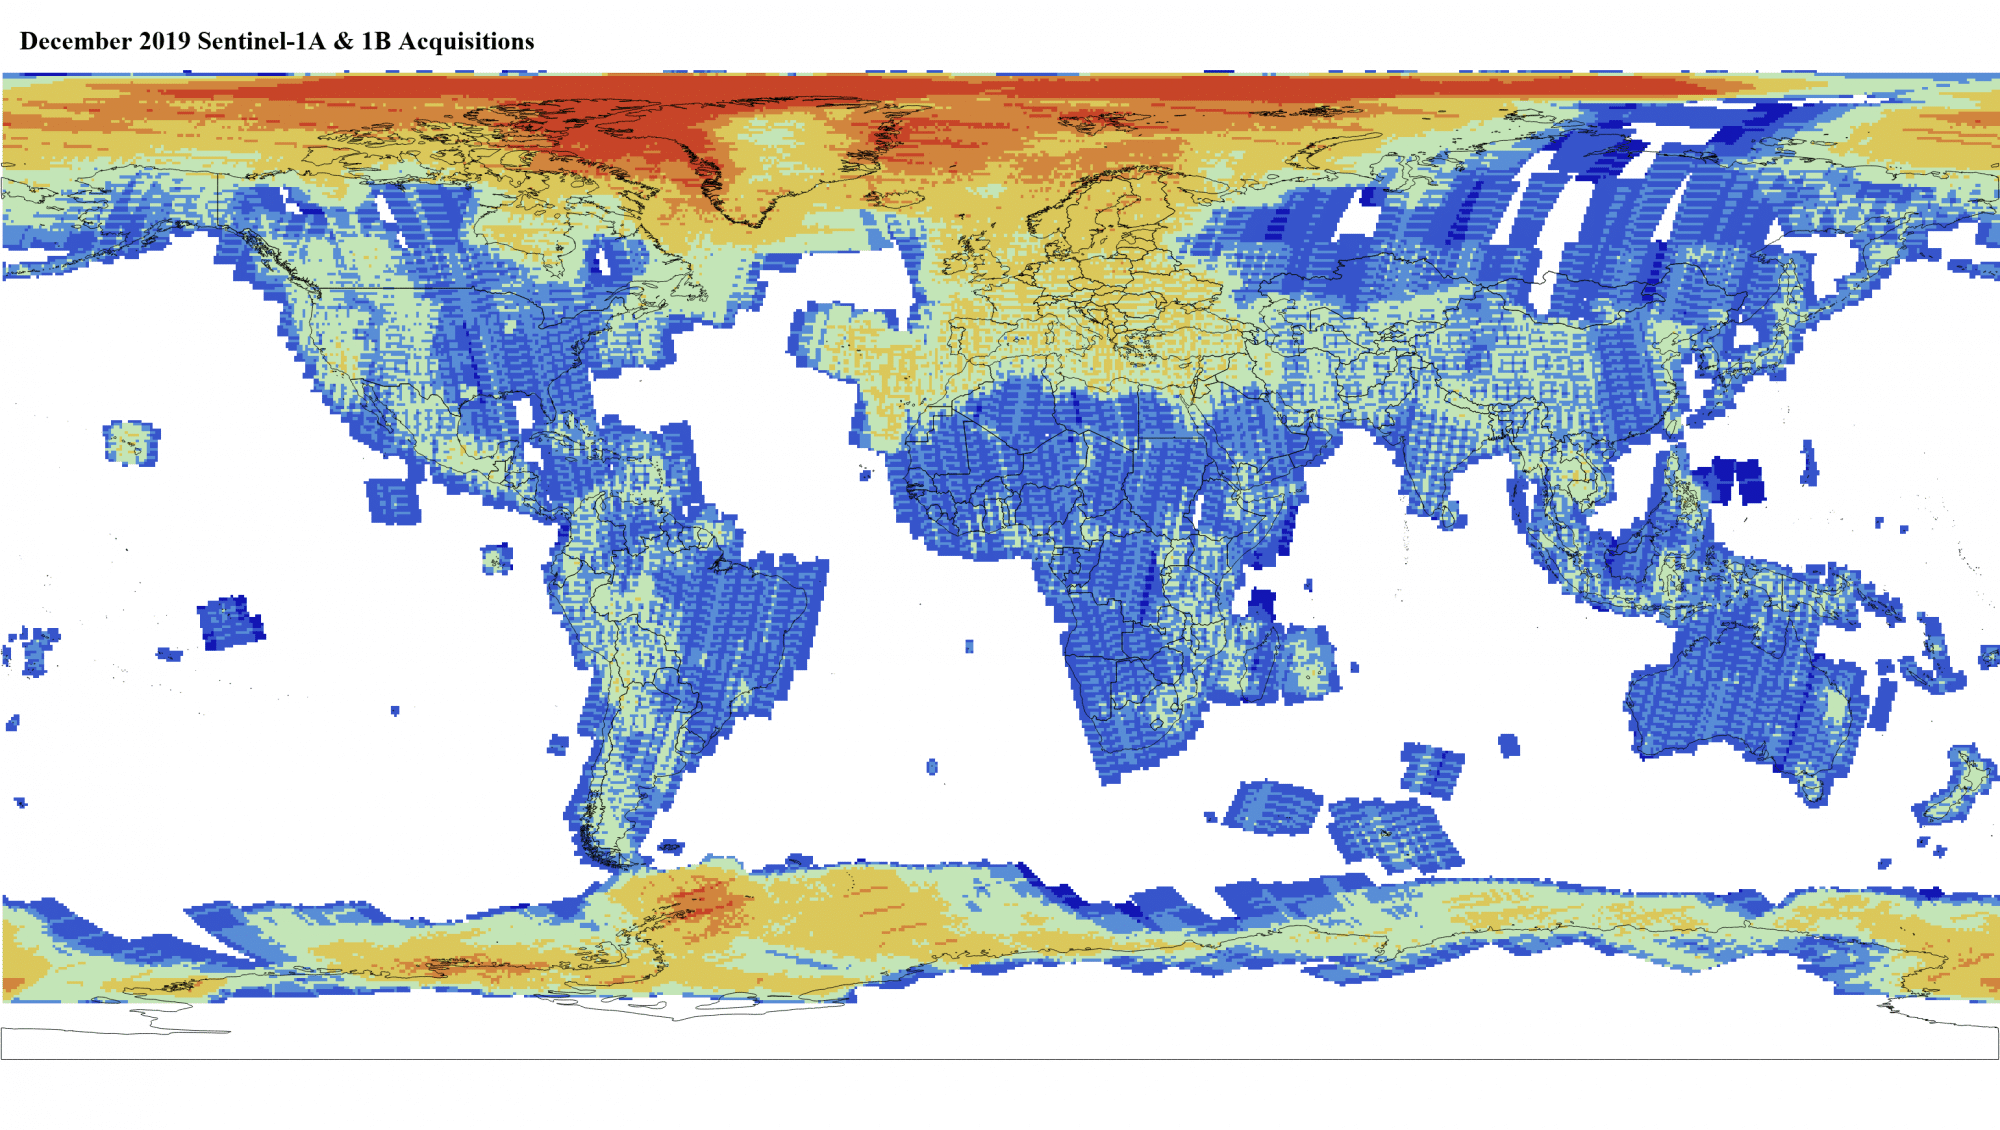 Heat map of Sentinel-1A and -1B GRD global acquisitions December 2019